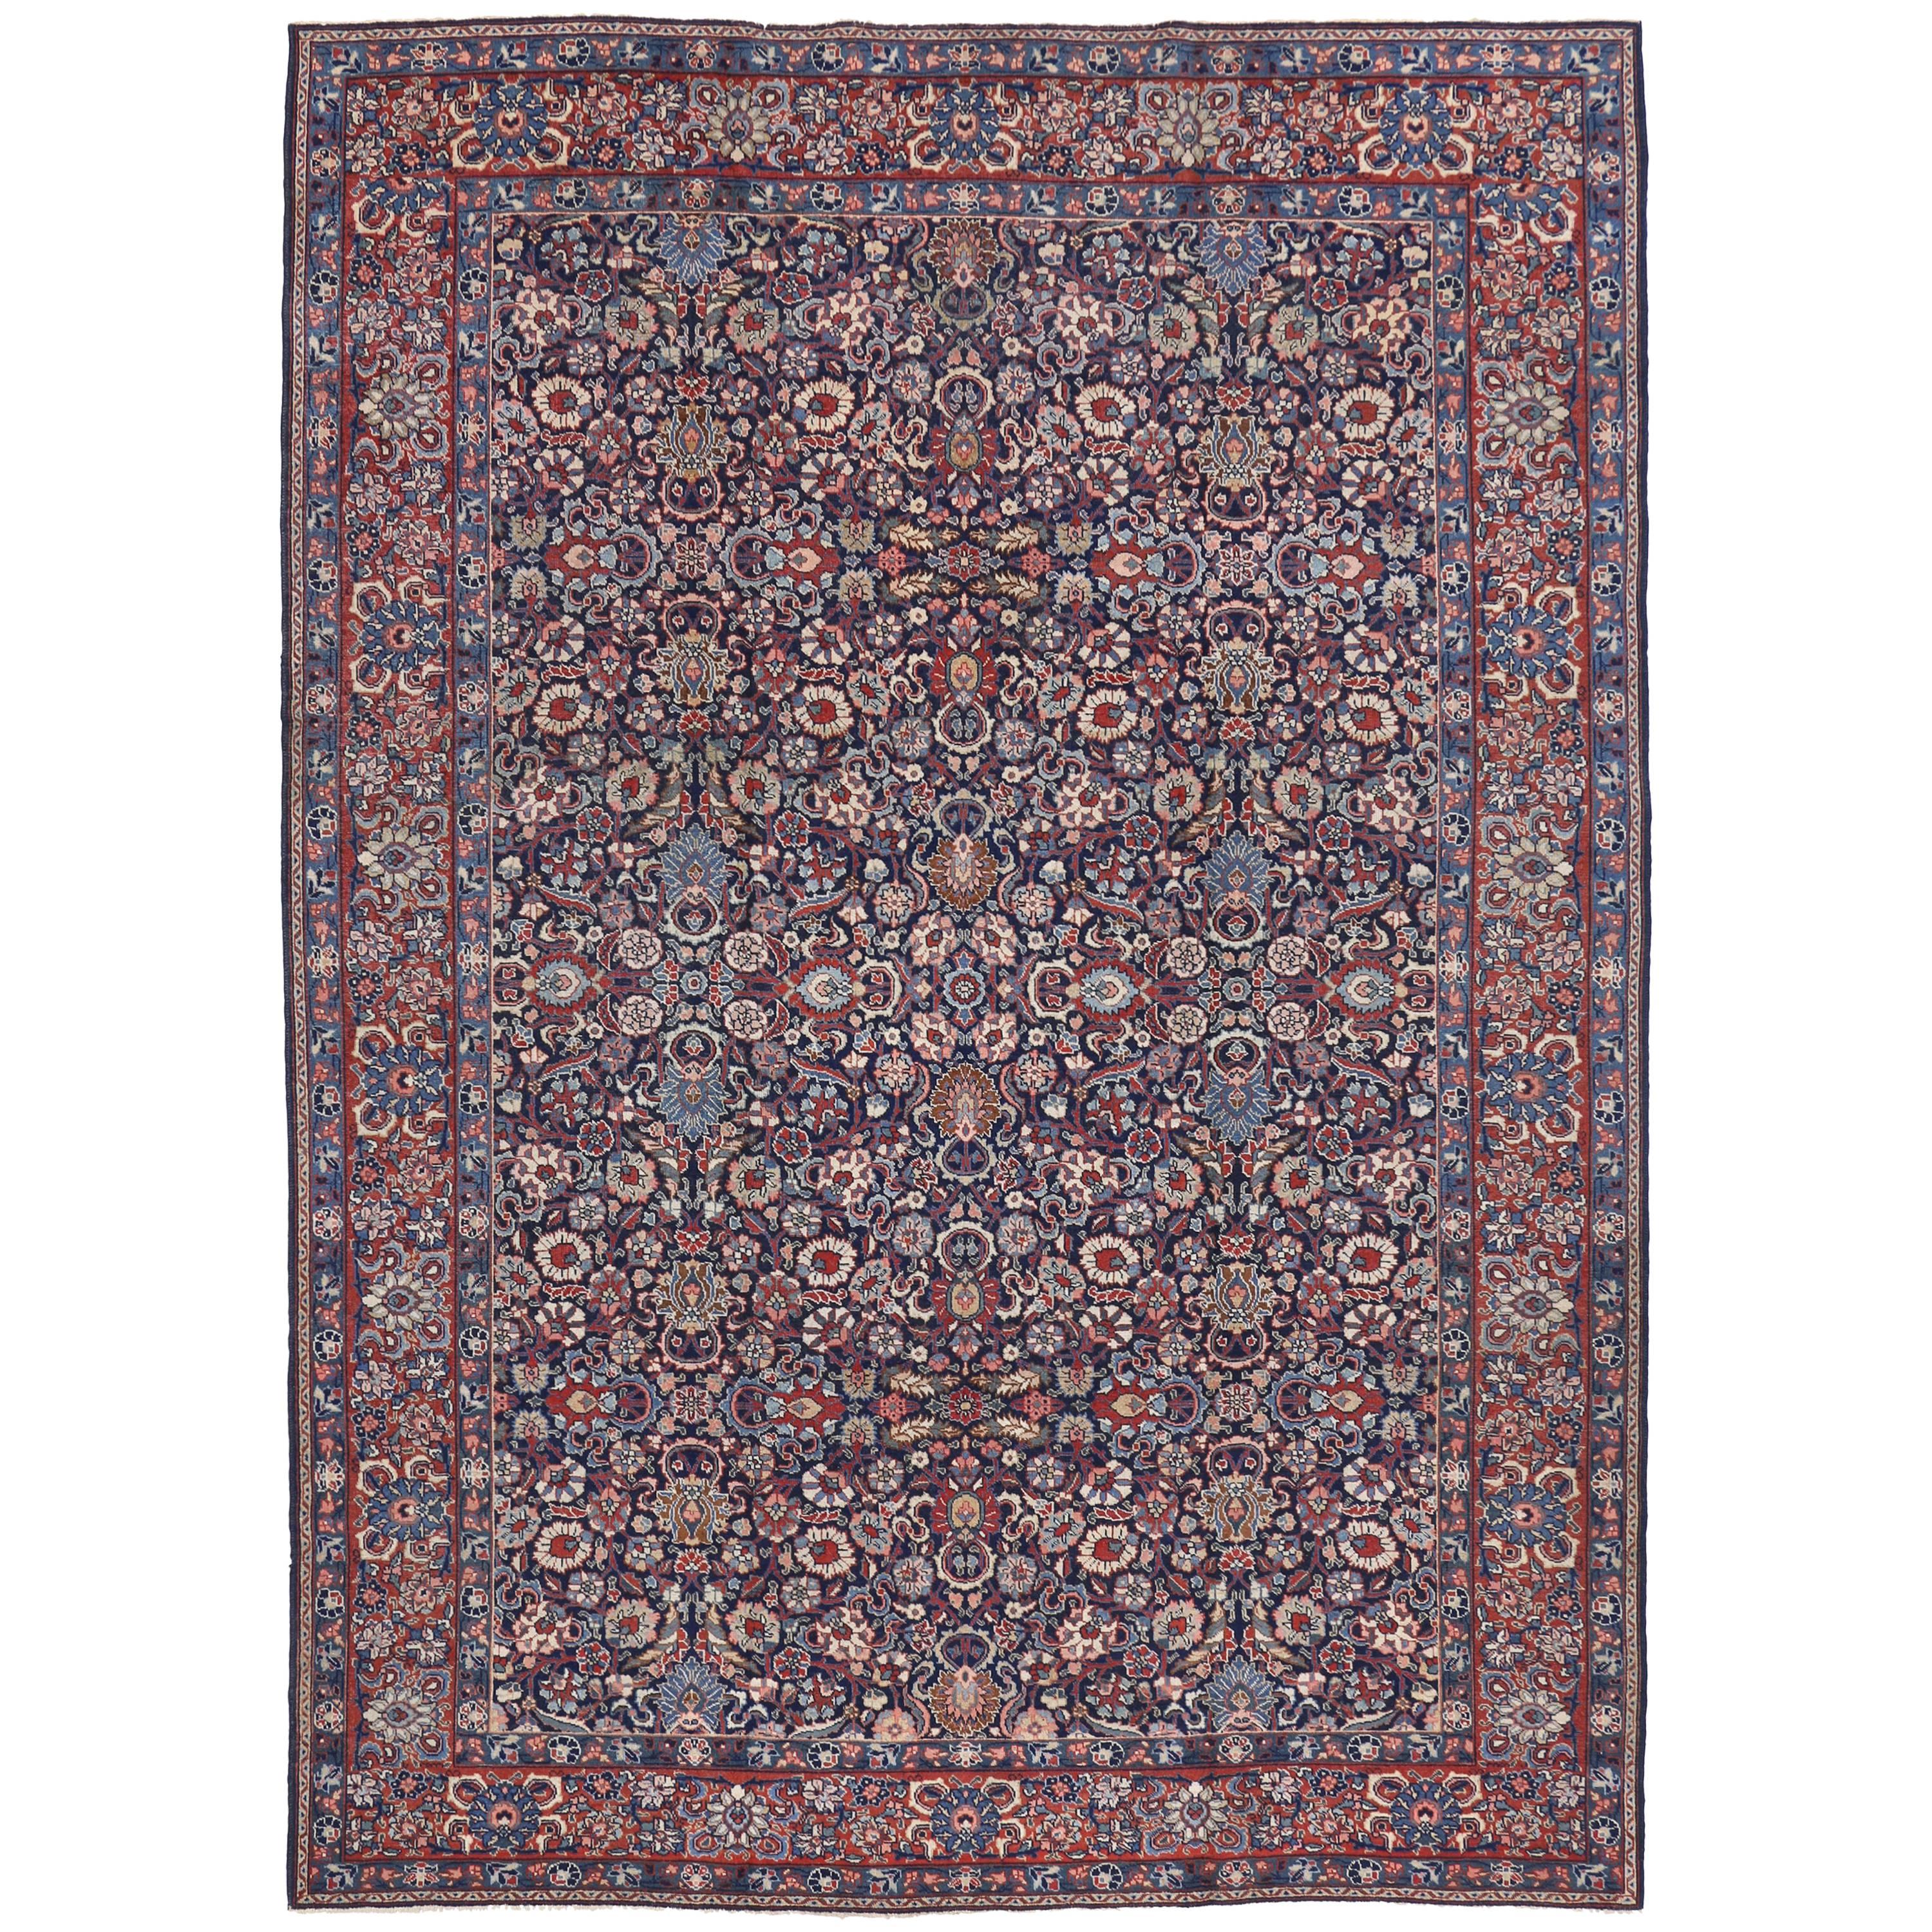 Antique Persian Tabriz Area Rug with Luxe Baroque Style